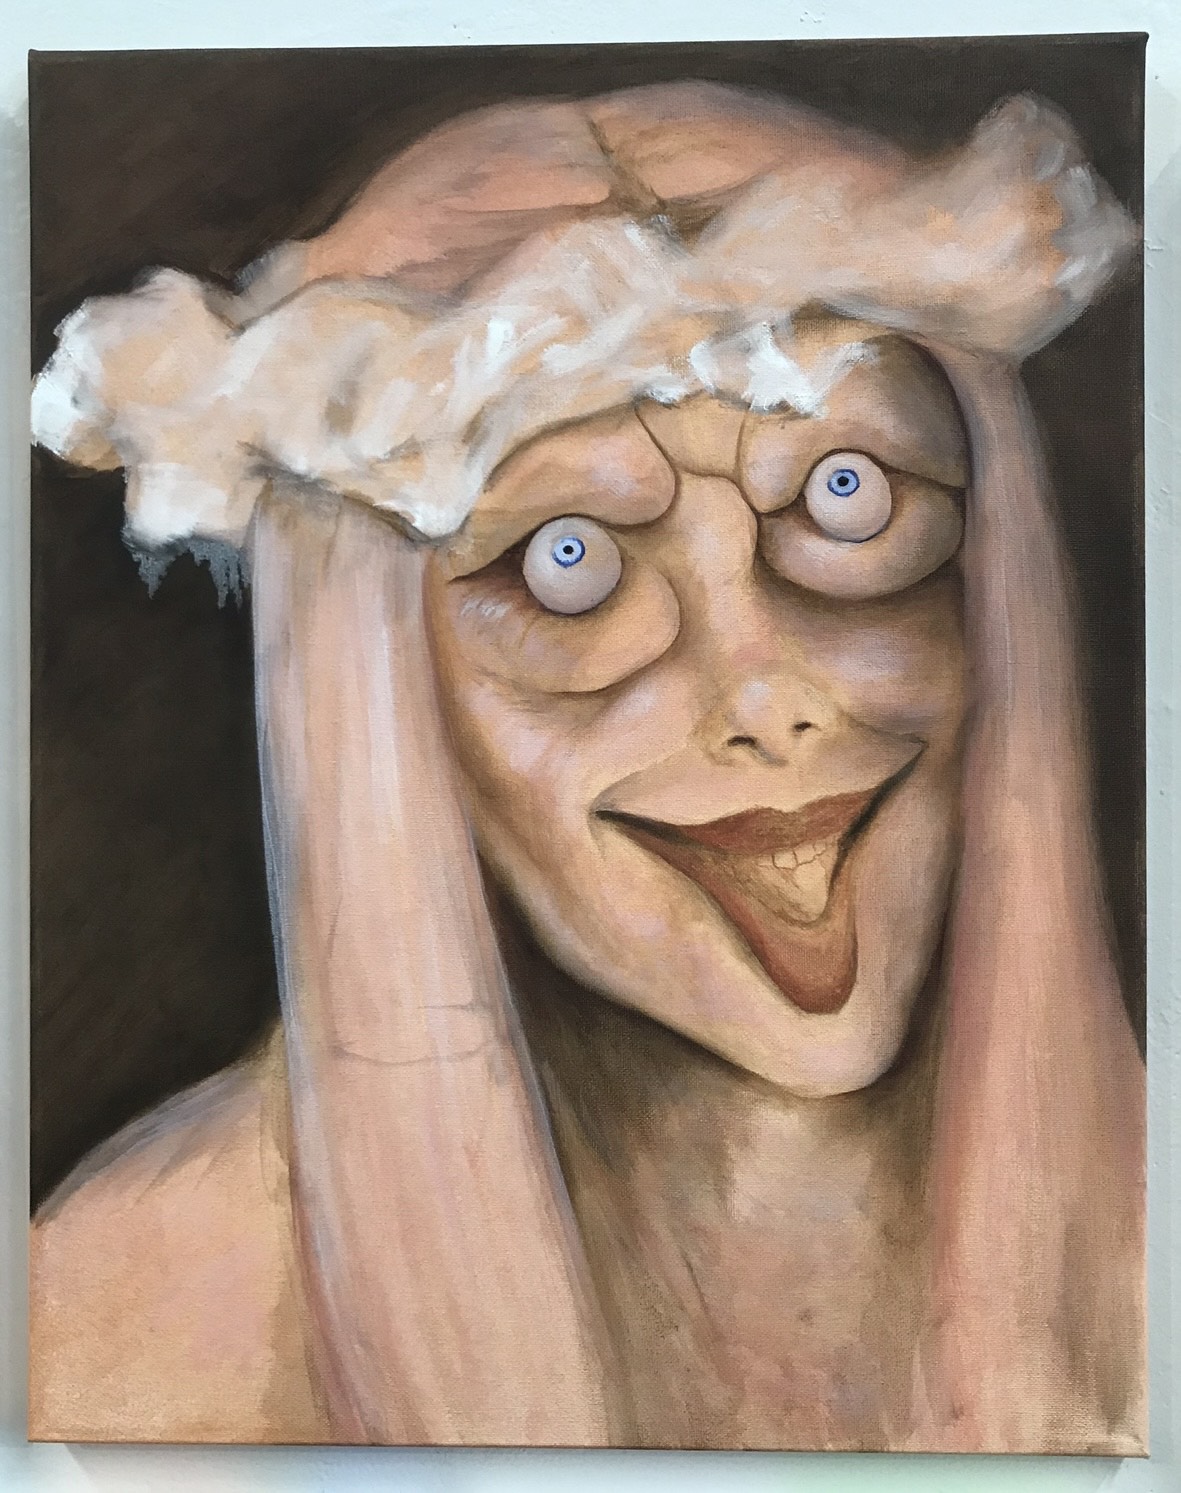 Grotesque woman with bulging eyes looks up towards the sky while smiling wide